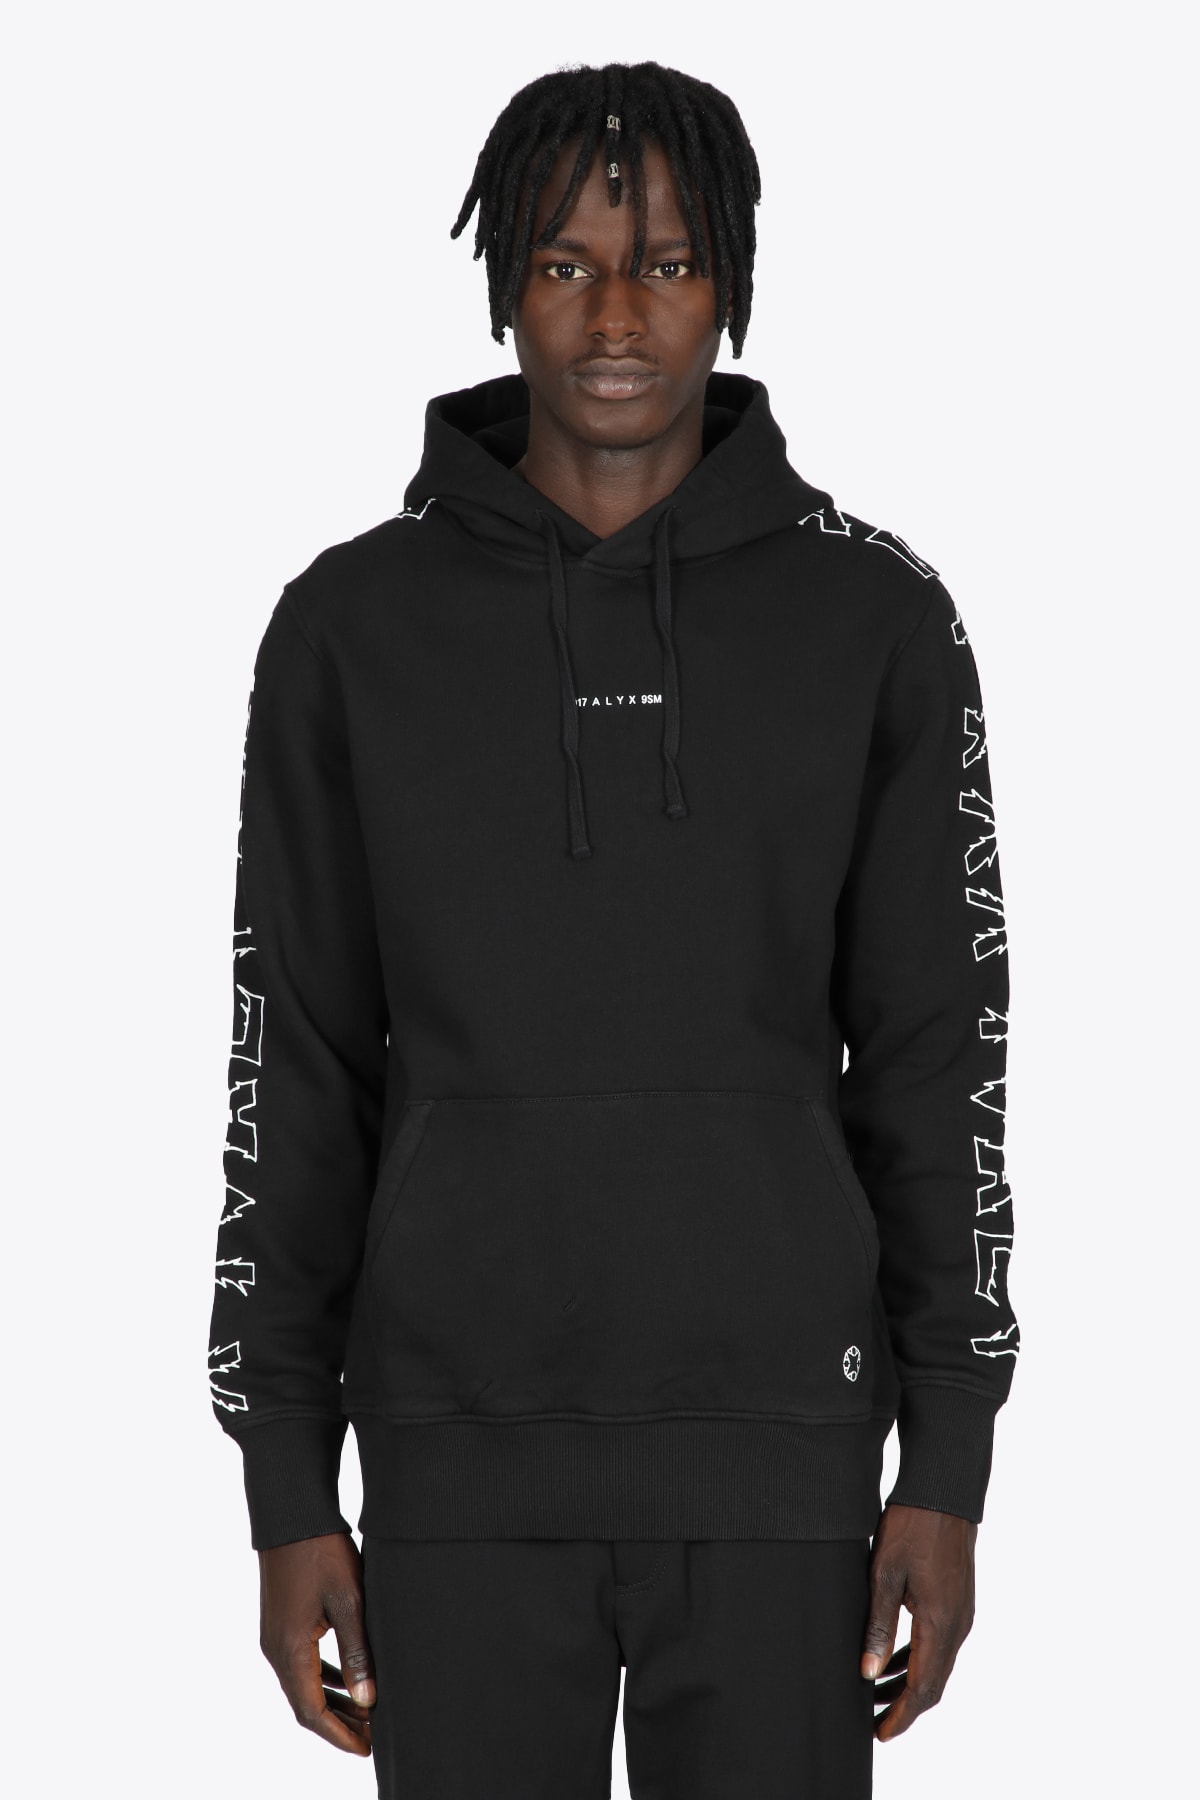 1017 ALYX 9SM Graphic Hoodie Black cotton hoodie with graphic logo on sleeves - Graphic hoodie